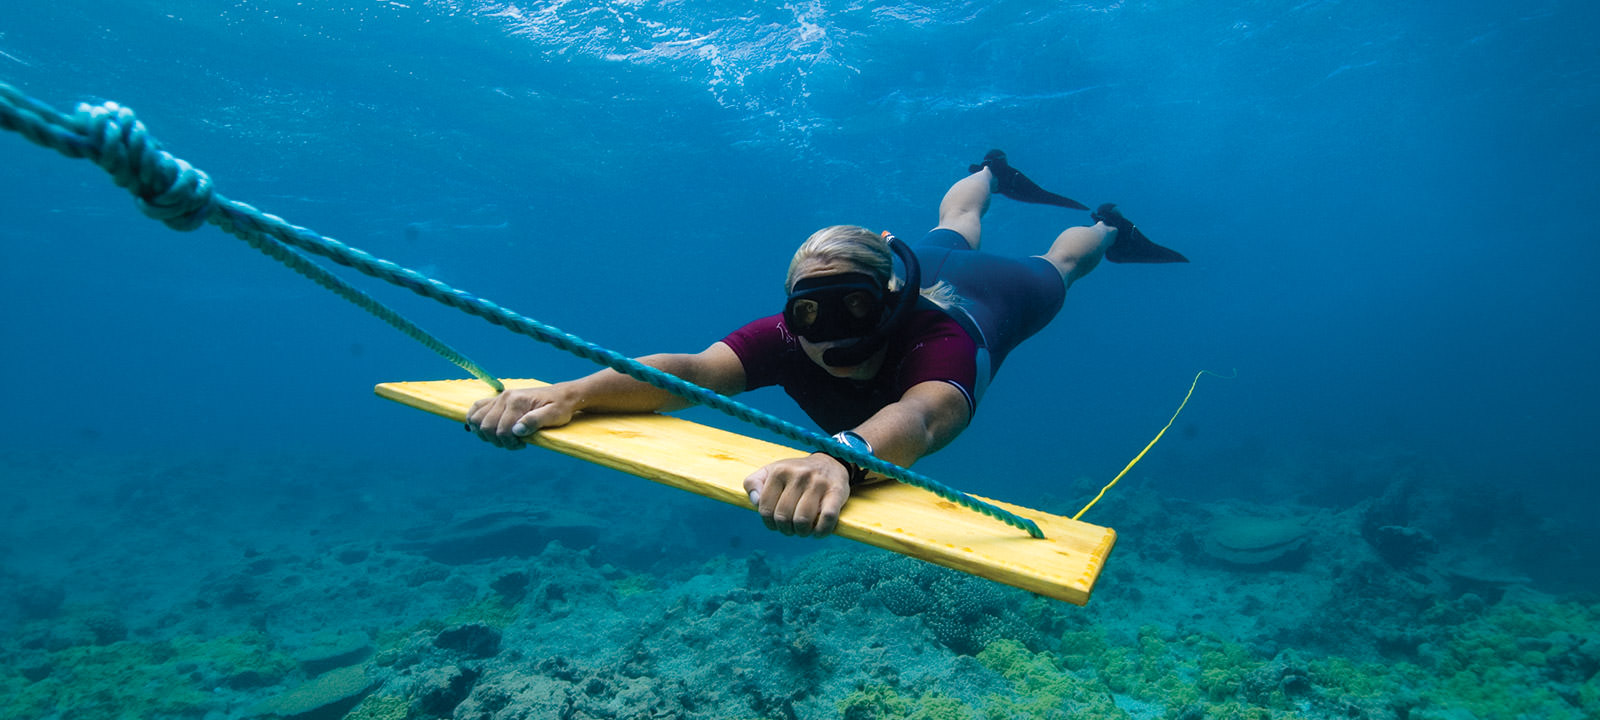 researcher being pull on a tow board underwater